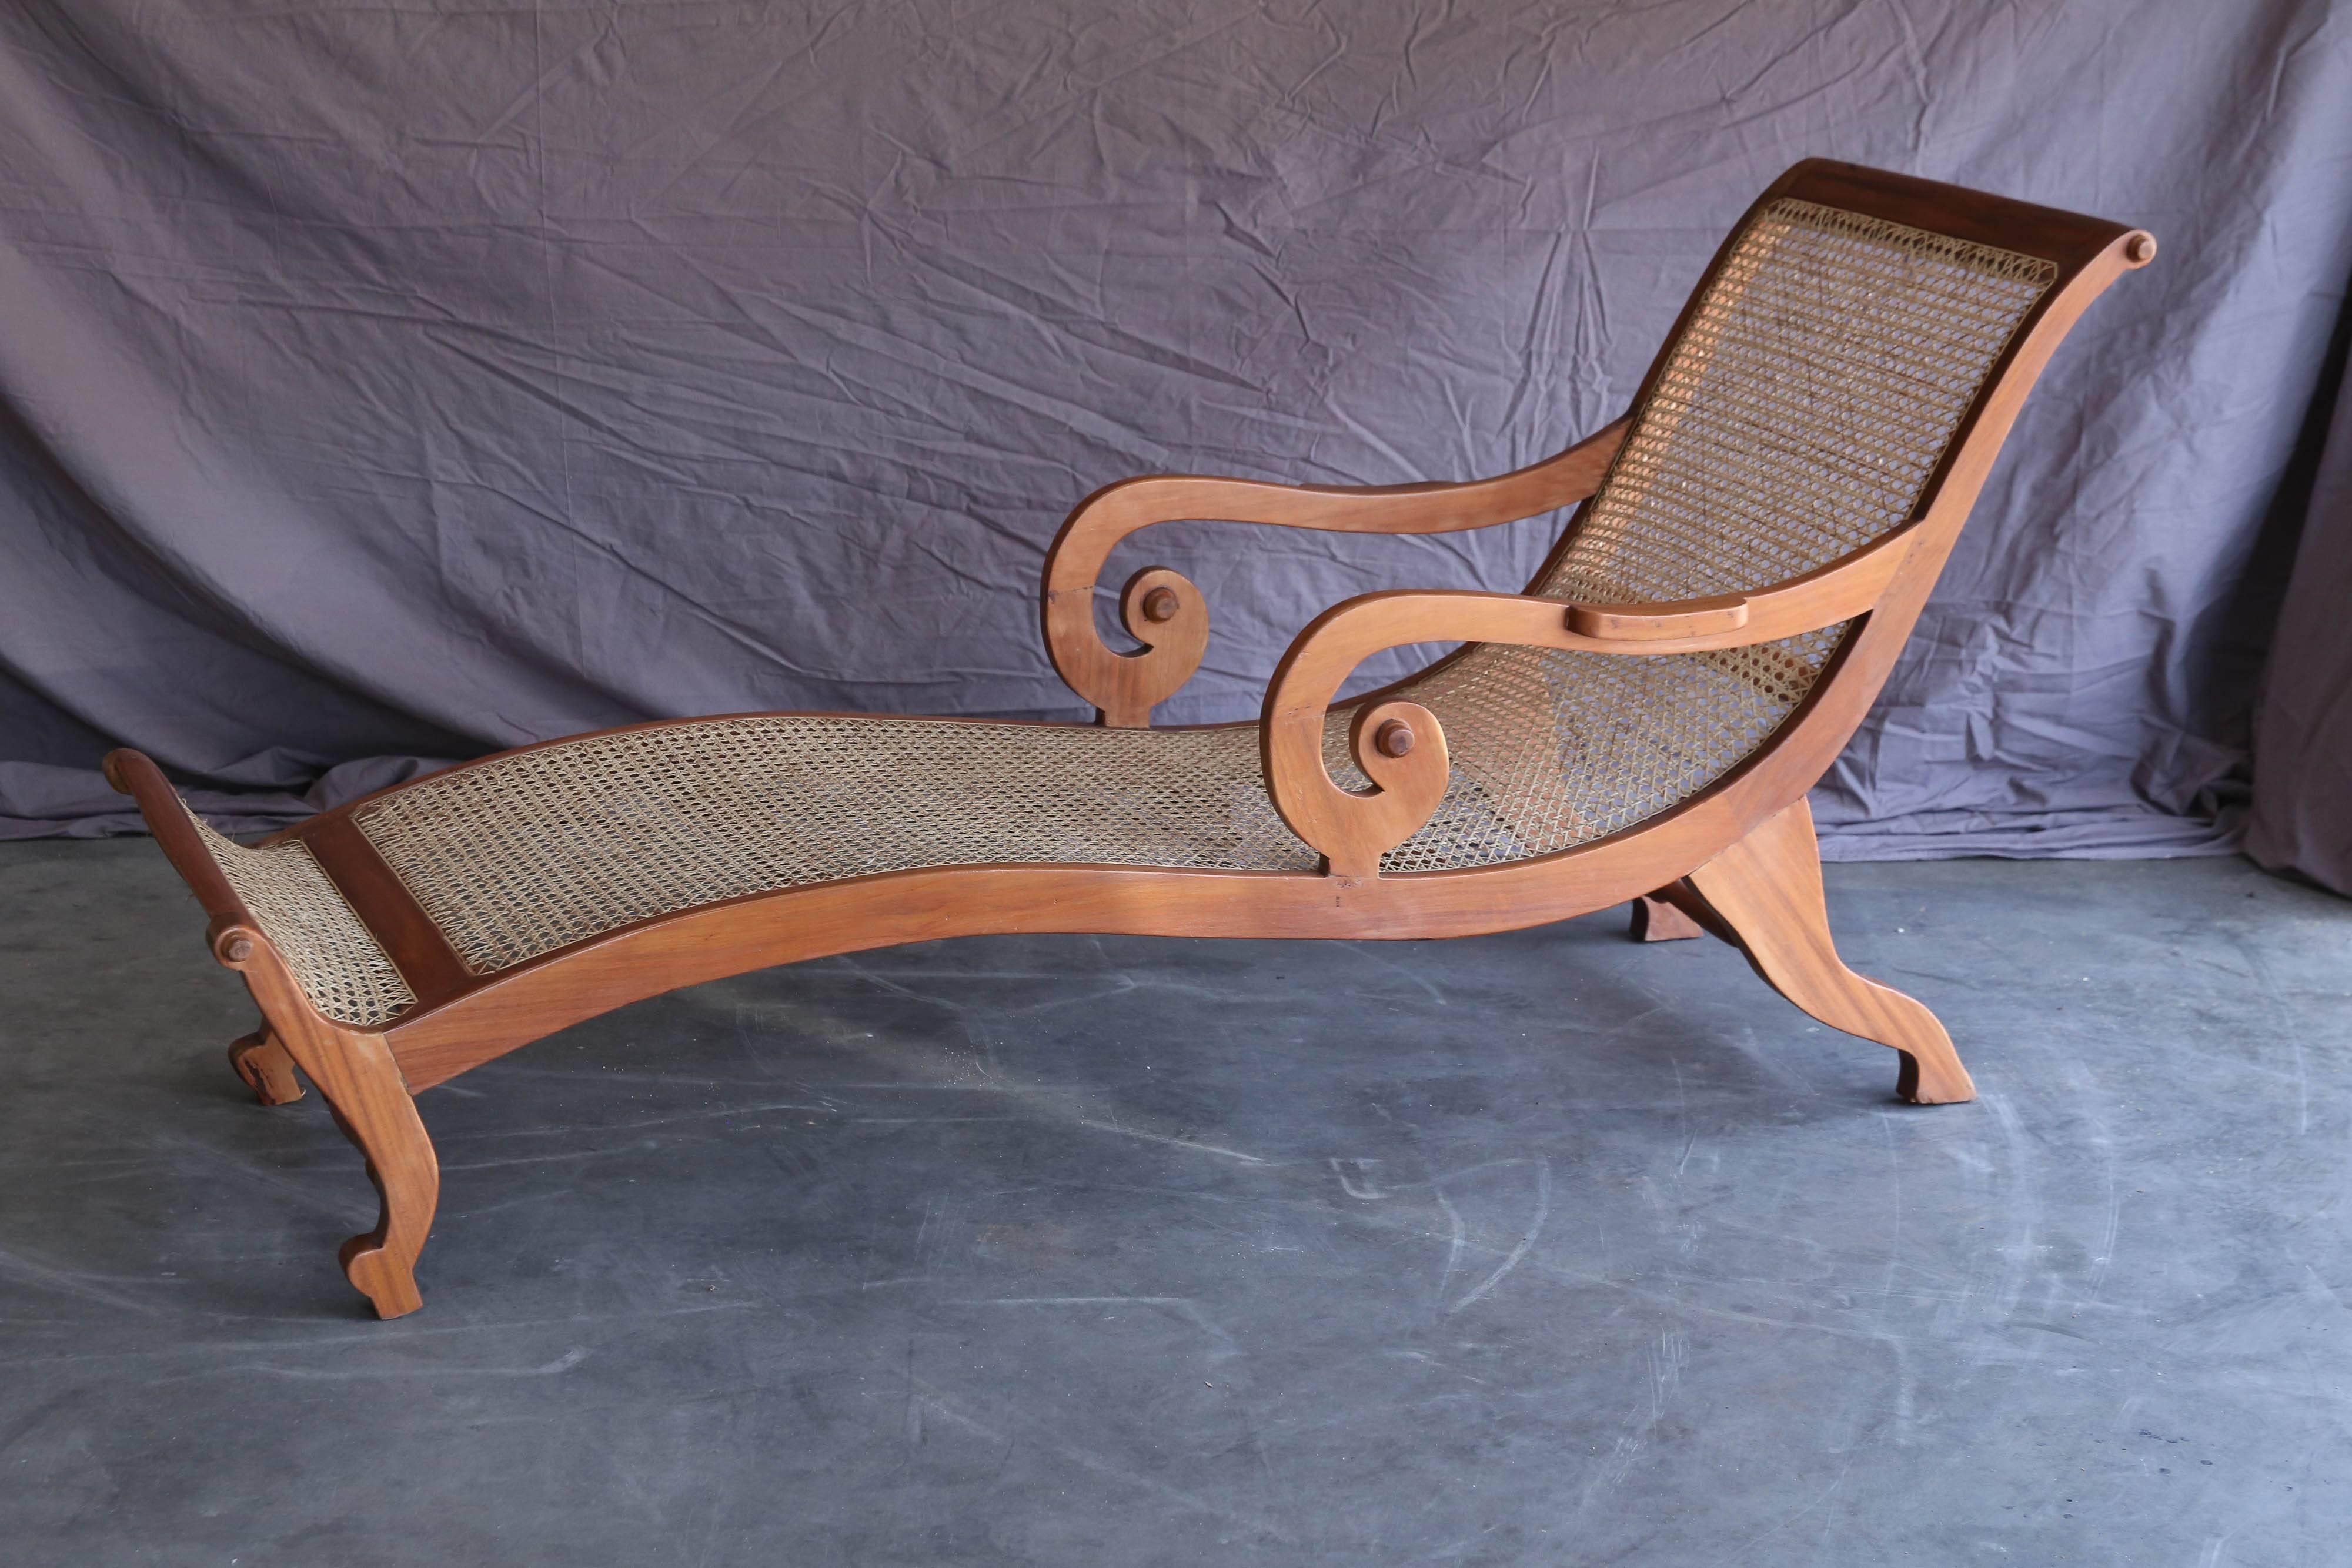 This elegant daybed was designed and made by some of the finest wood crafters in Sri Lanka. It was made with comfort in mind. Very fine Borneo cane and teak wood were used in making this custom-made daybed. The cane can last several decades if it is